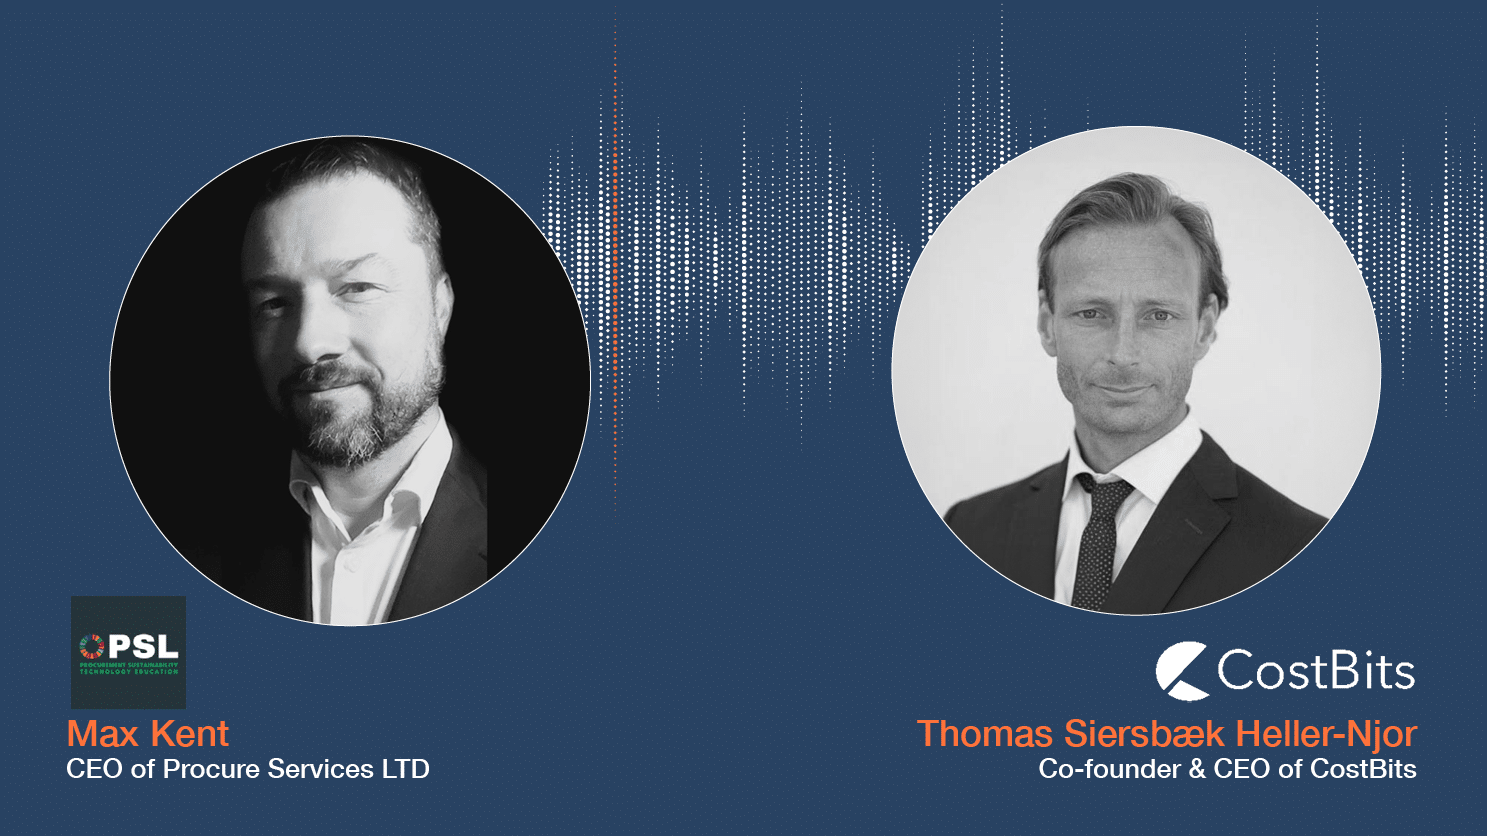 In this thought-provoking episode, Thomas takes us on a journey into the world of fintech, startup, procurement, supplychain, and sustainability. With his extensive background in strategic sourcing, purchasing, and management of categories, commodities, suppliers, and various projects, Thomas is a true trailblazer in the field.